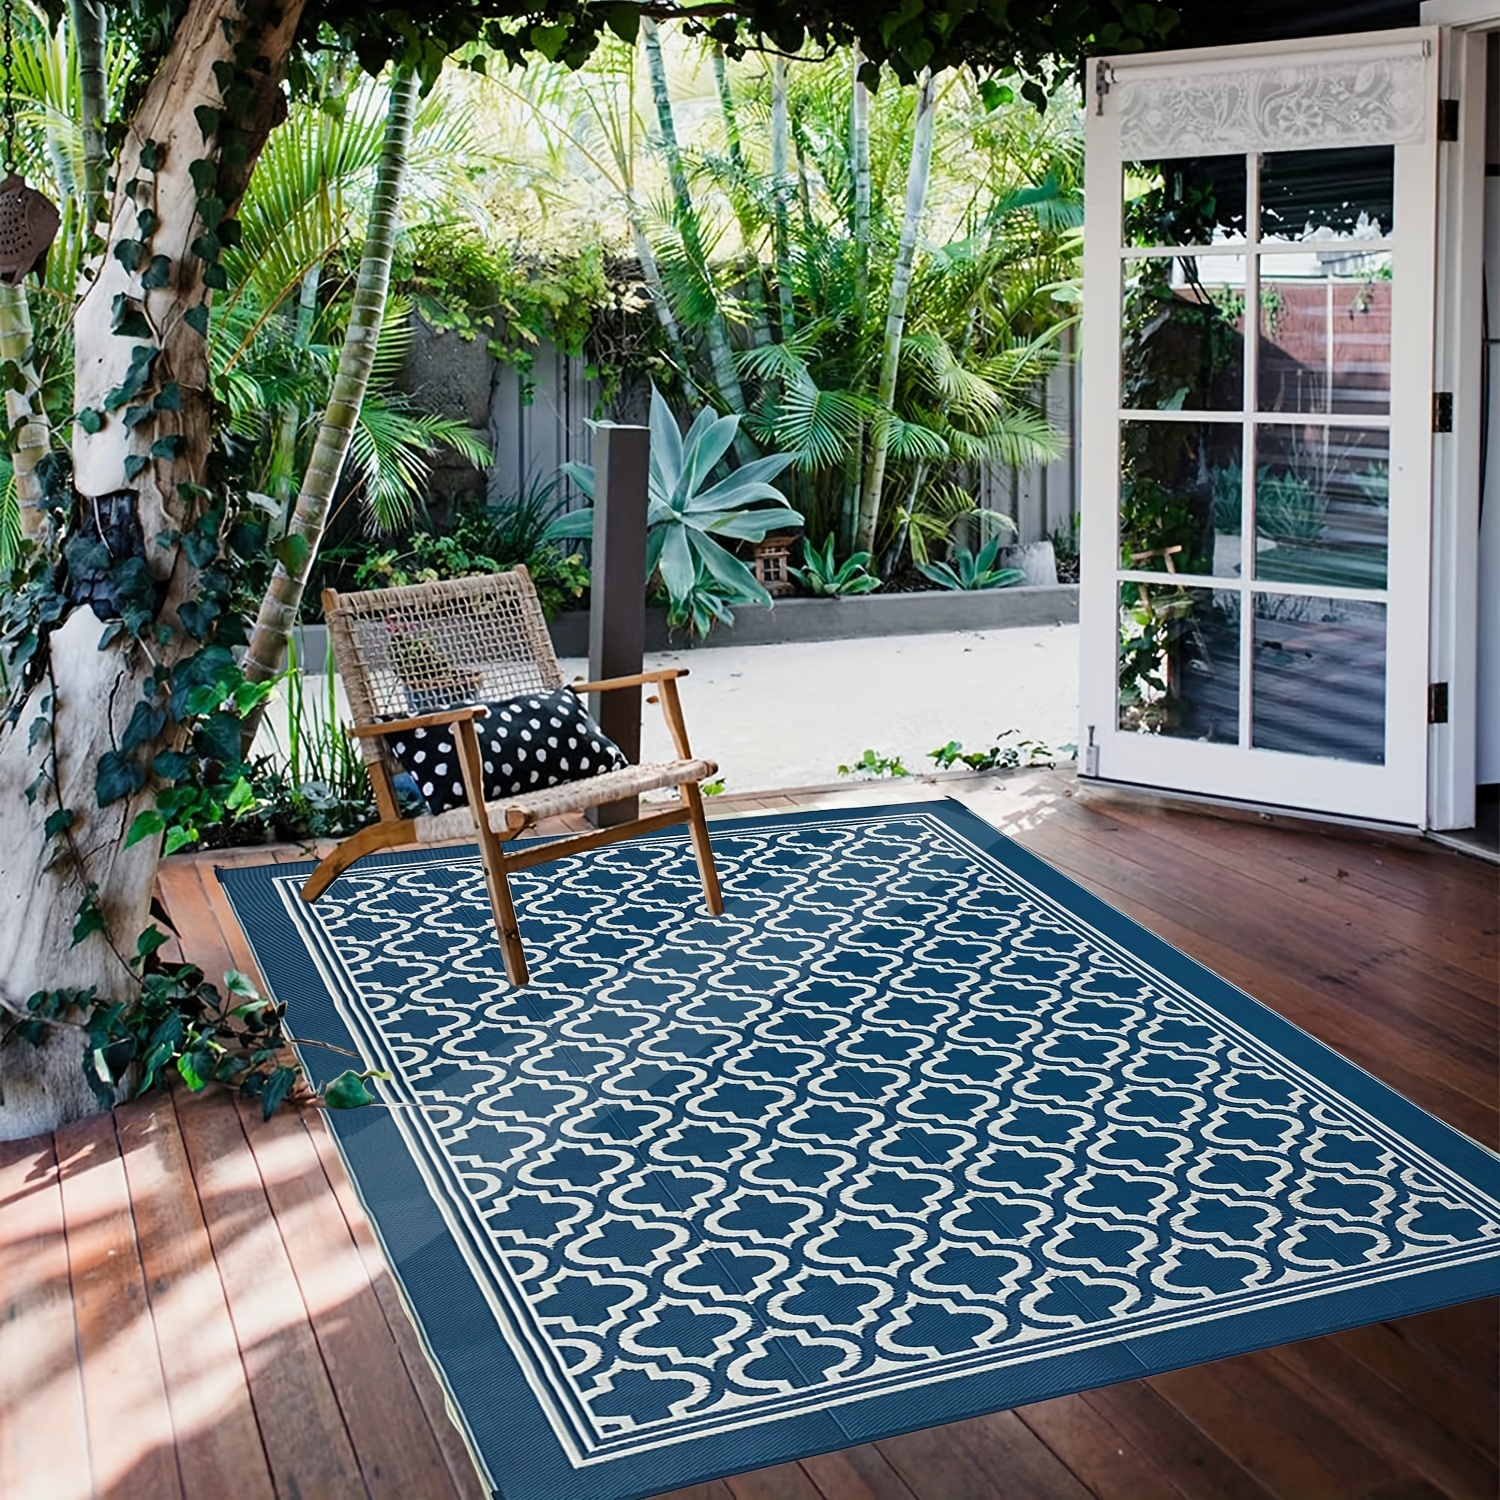 Reversible Mats - Plastic Straw Rug, Outdoor Rug for Patio Clearance Decor,  Modern Area Rugs, Floor Mat for Outdoors, RV, Backyard, Deck, Picnic